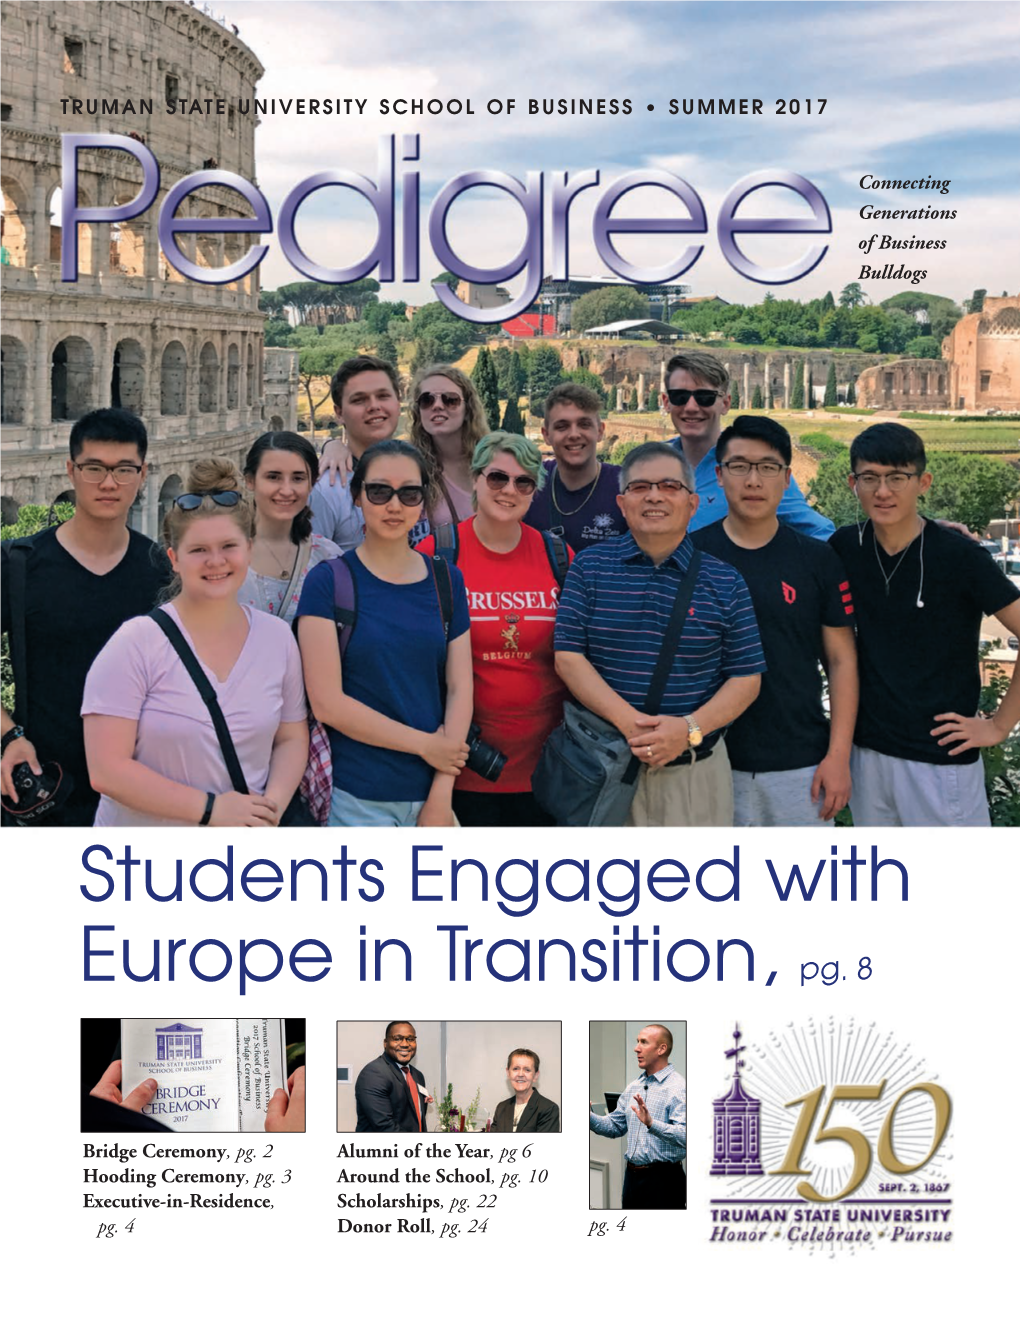 Students Engaged with Europe in Transition, Pg. 8